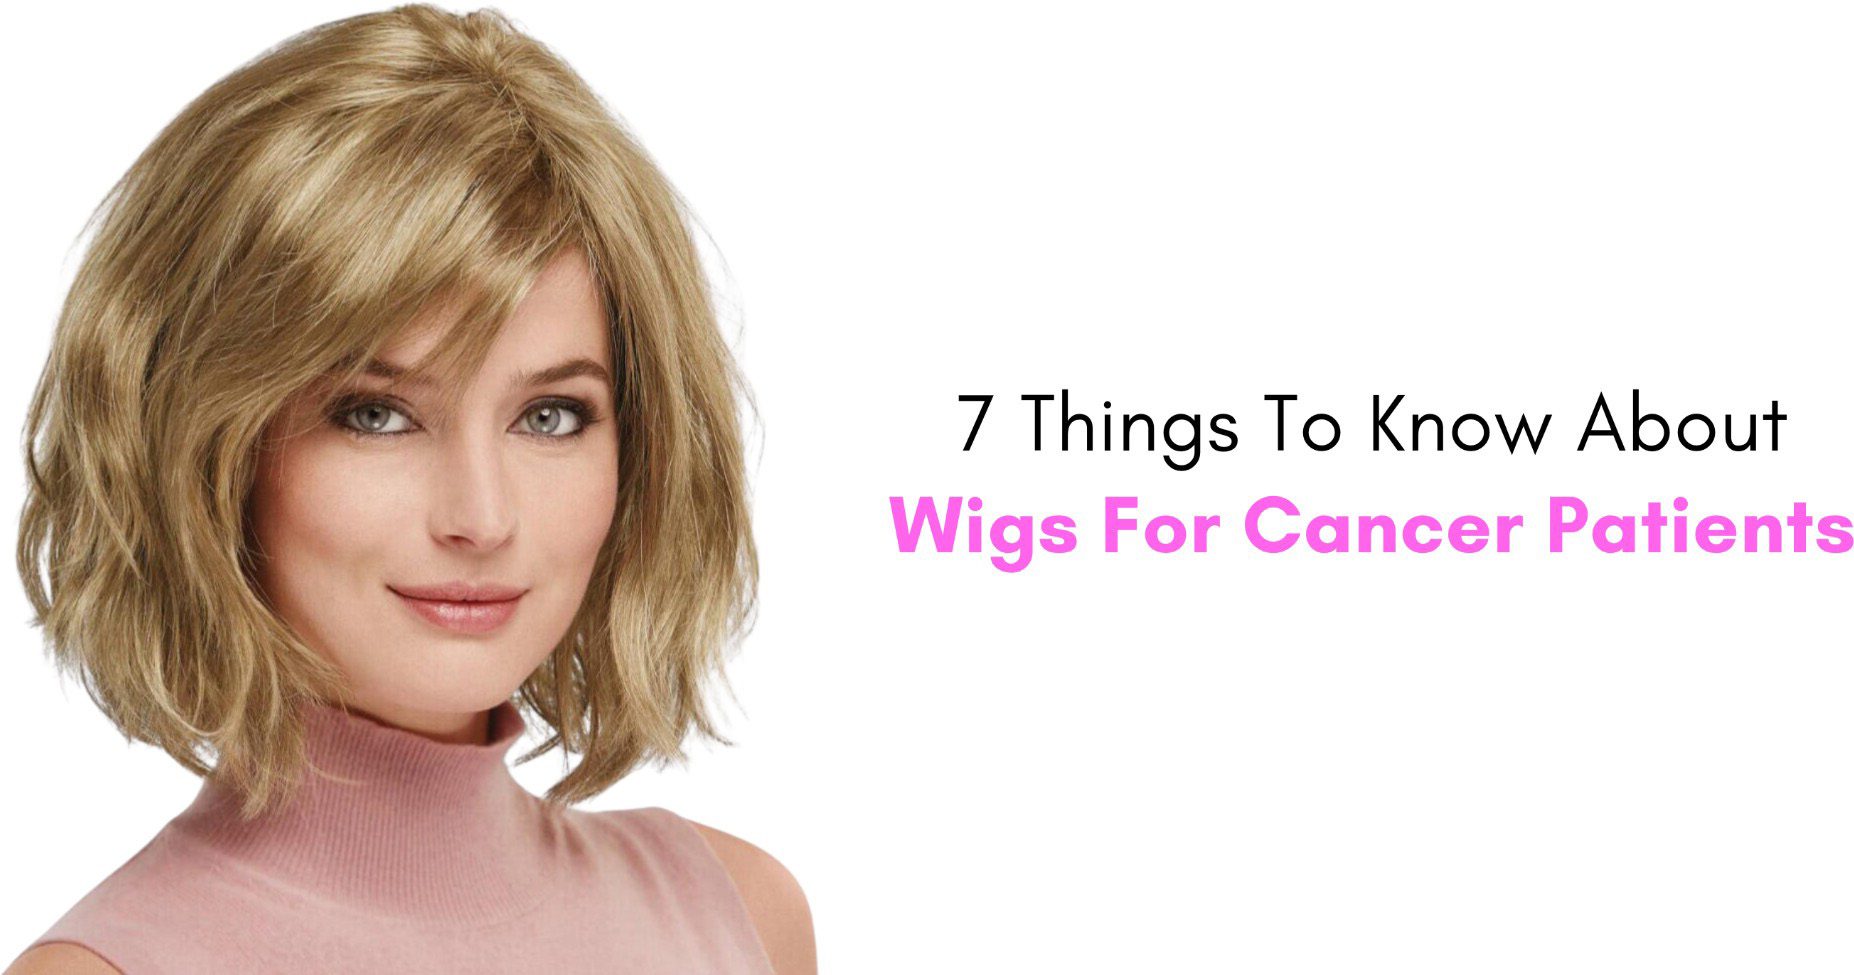 7 things to know about wigs for cancer patients